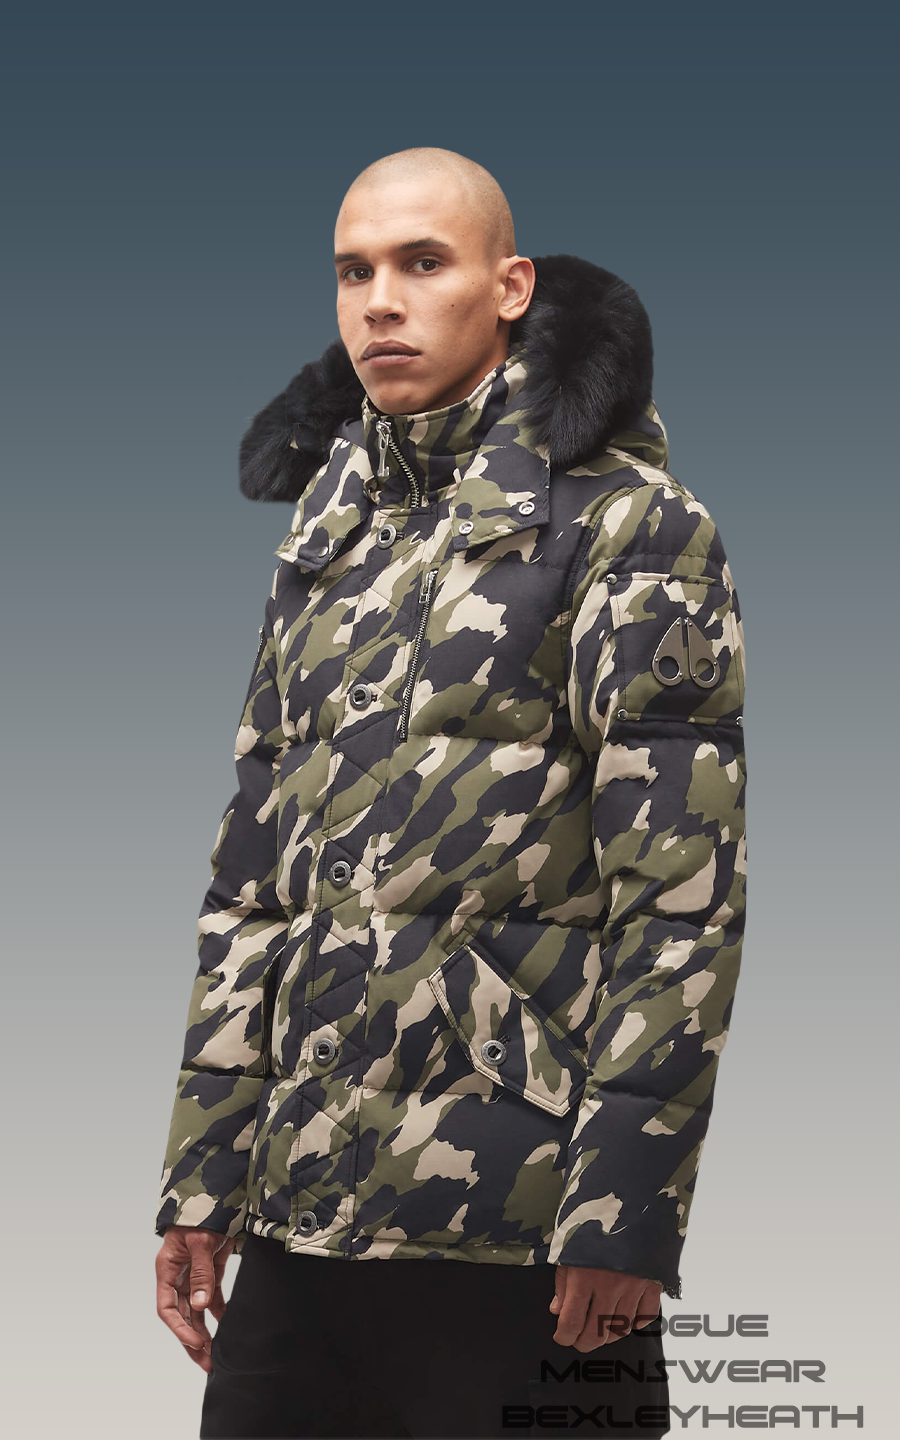 Moose Knuckles Limited Edition Q3 Jacket In Camo - Rogue Menswear